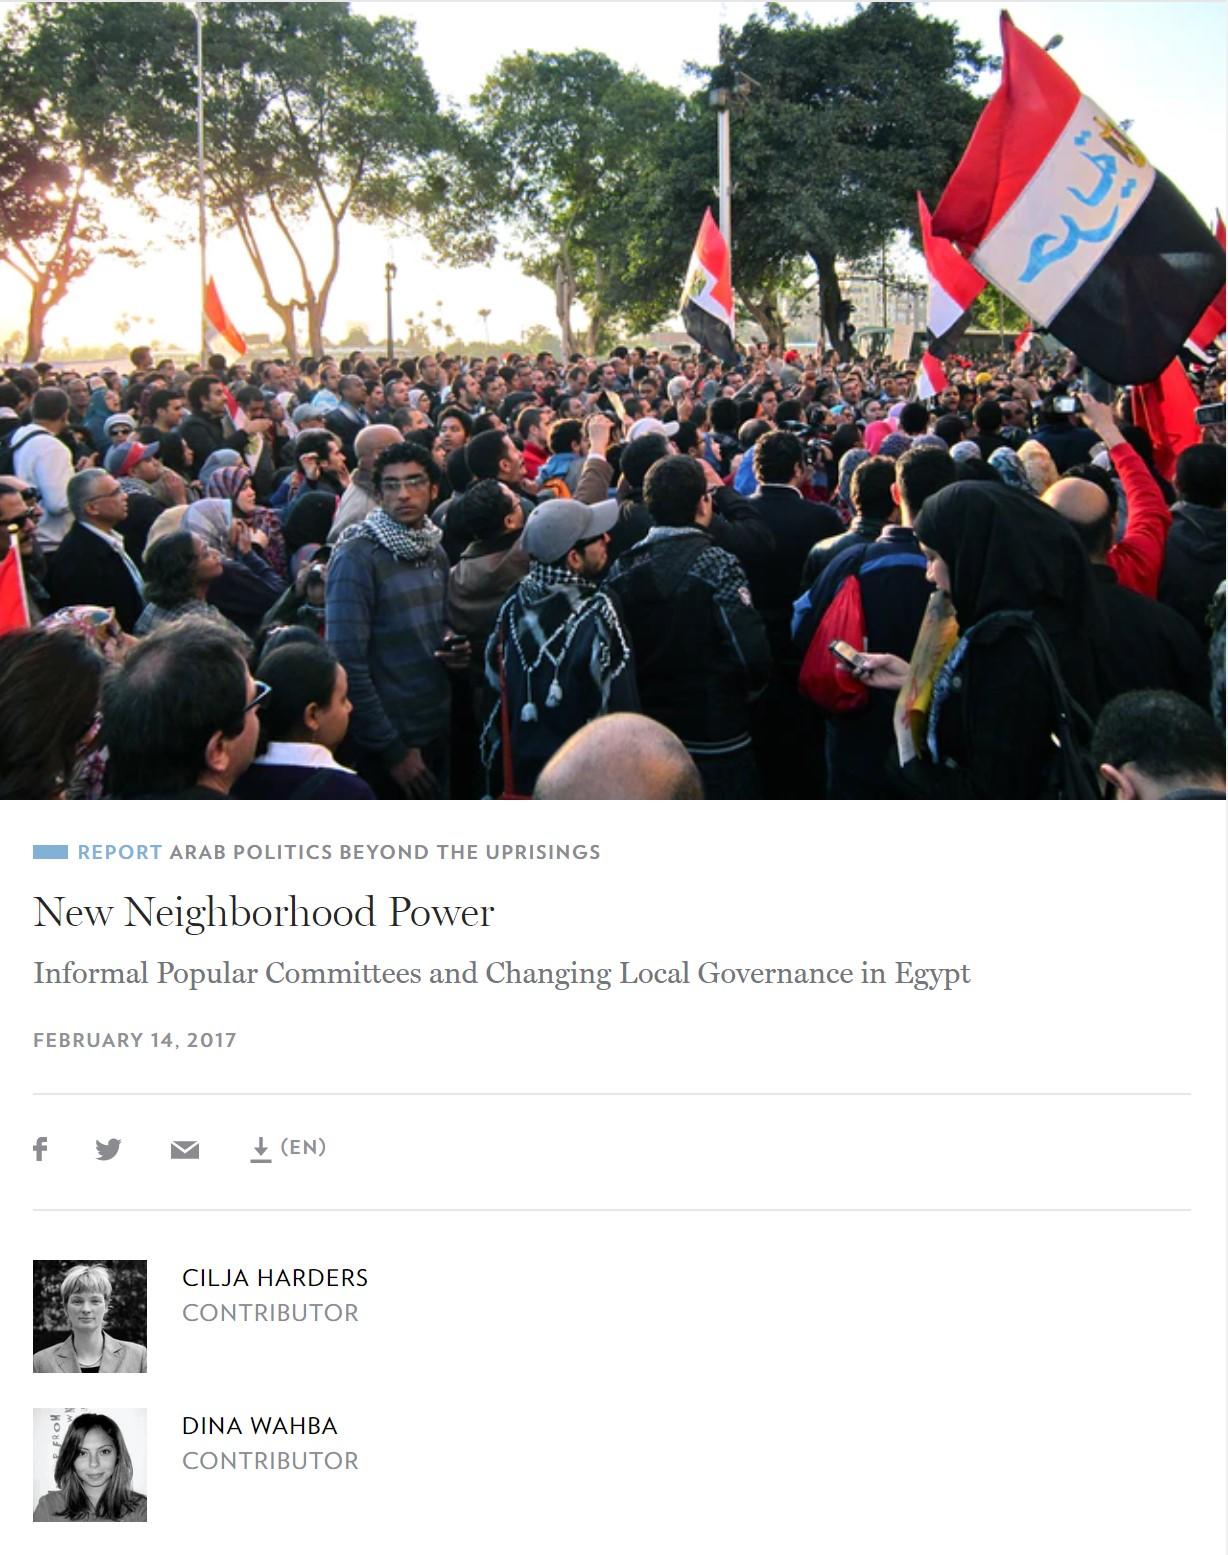 New Neighborhood Power, Informal Popular Committees and Changing Local Governance in Egypt